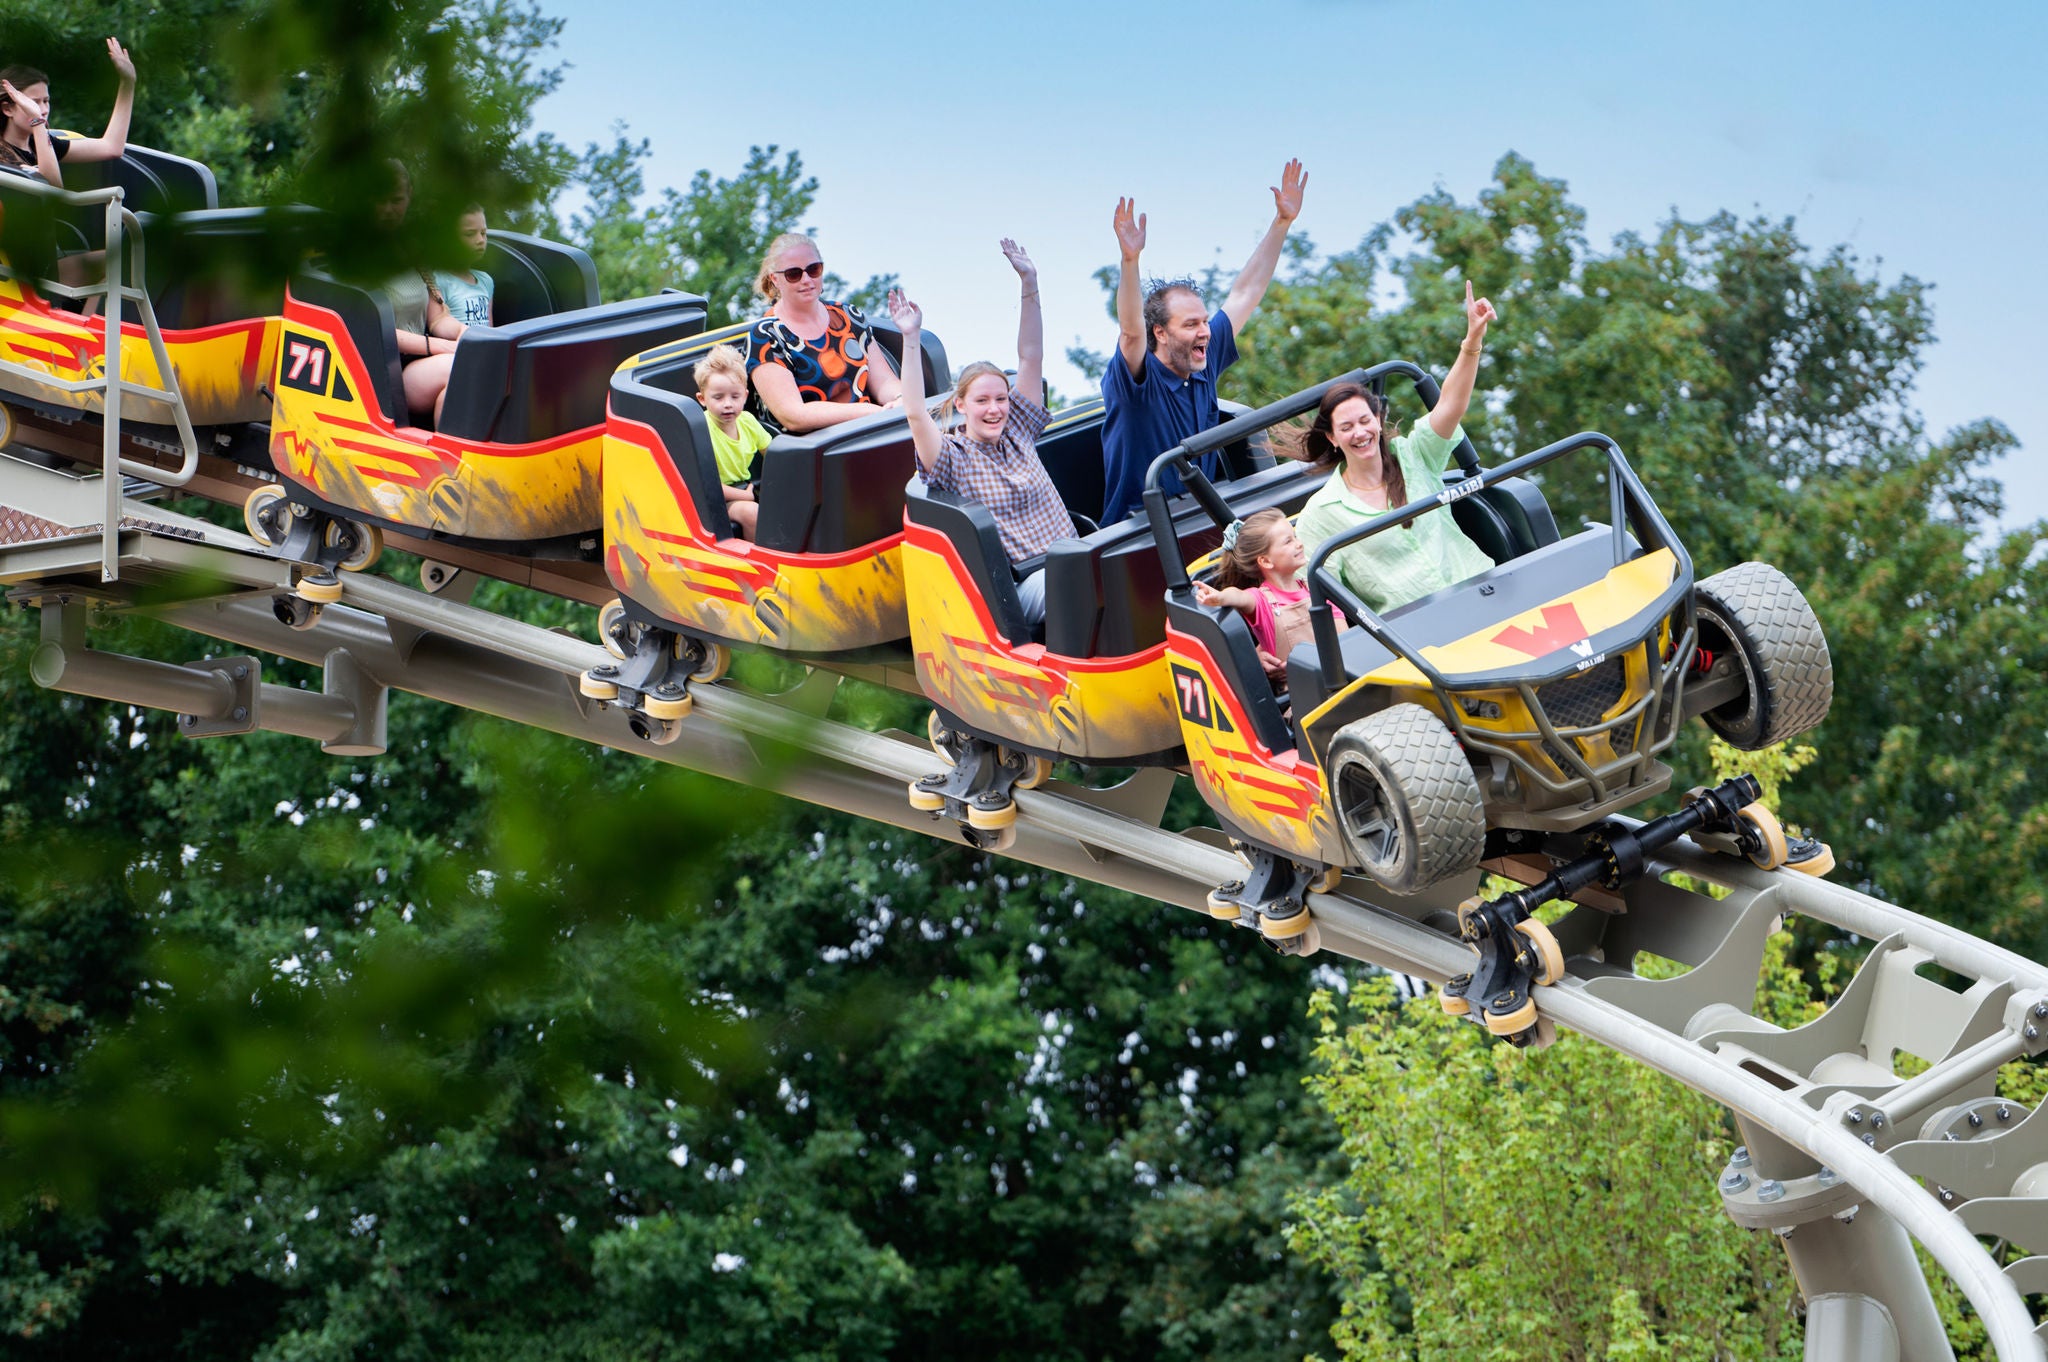 The attraction eat my dust at Walibi Holland